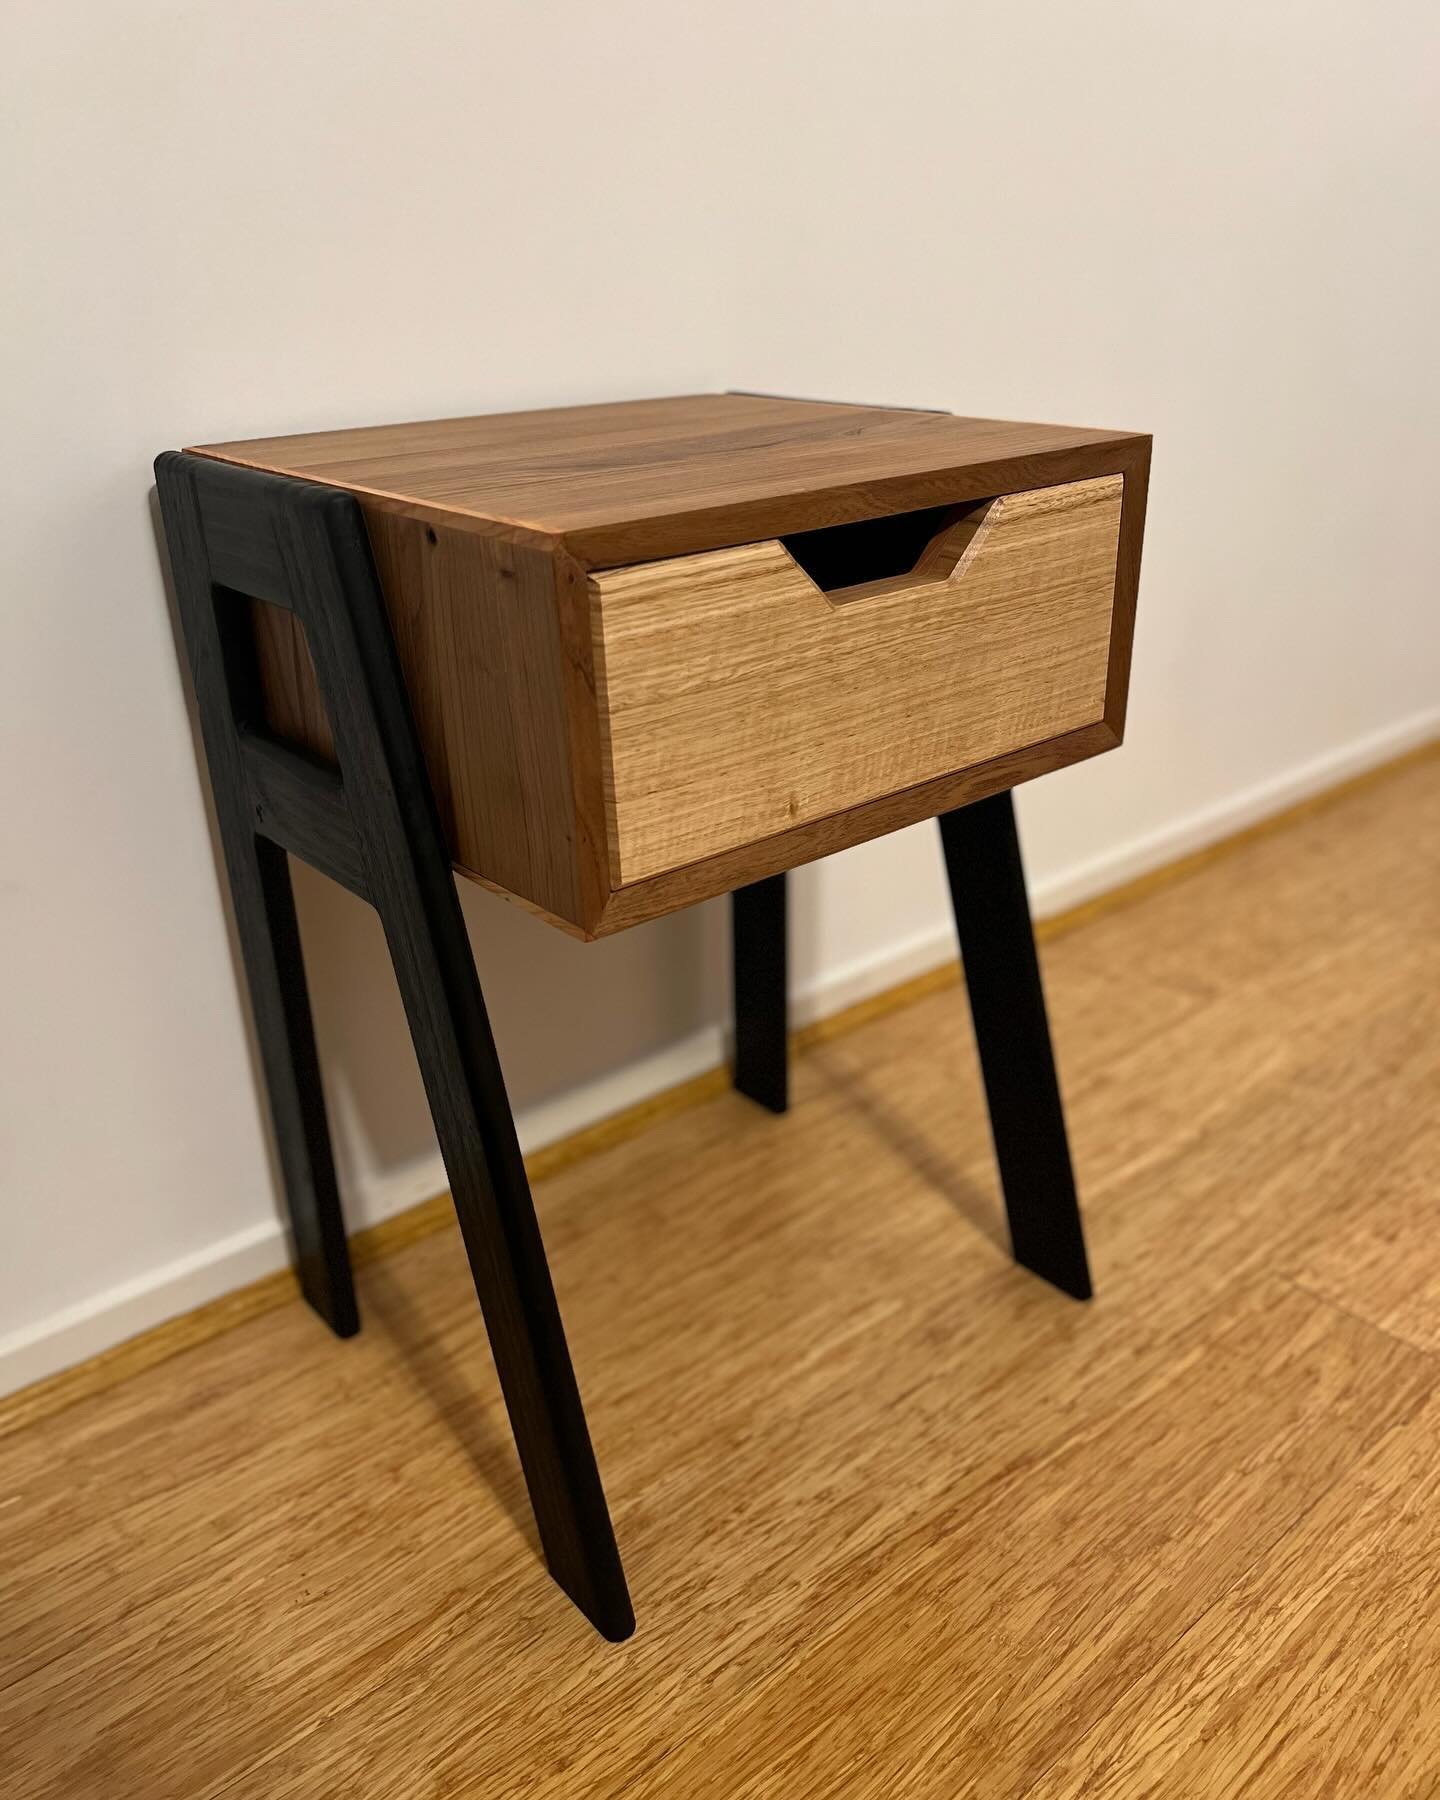 This prototype was made in a weekend. It&rsquo;s a simple nightstand with a single draw and some striking legs. Experimented with India ink to blacken the legs and it worked really well. The English Elm carcass produces a beautiful contrast to the Ma